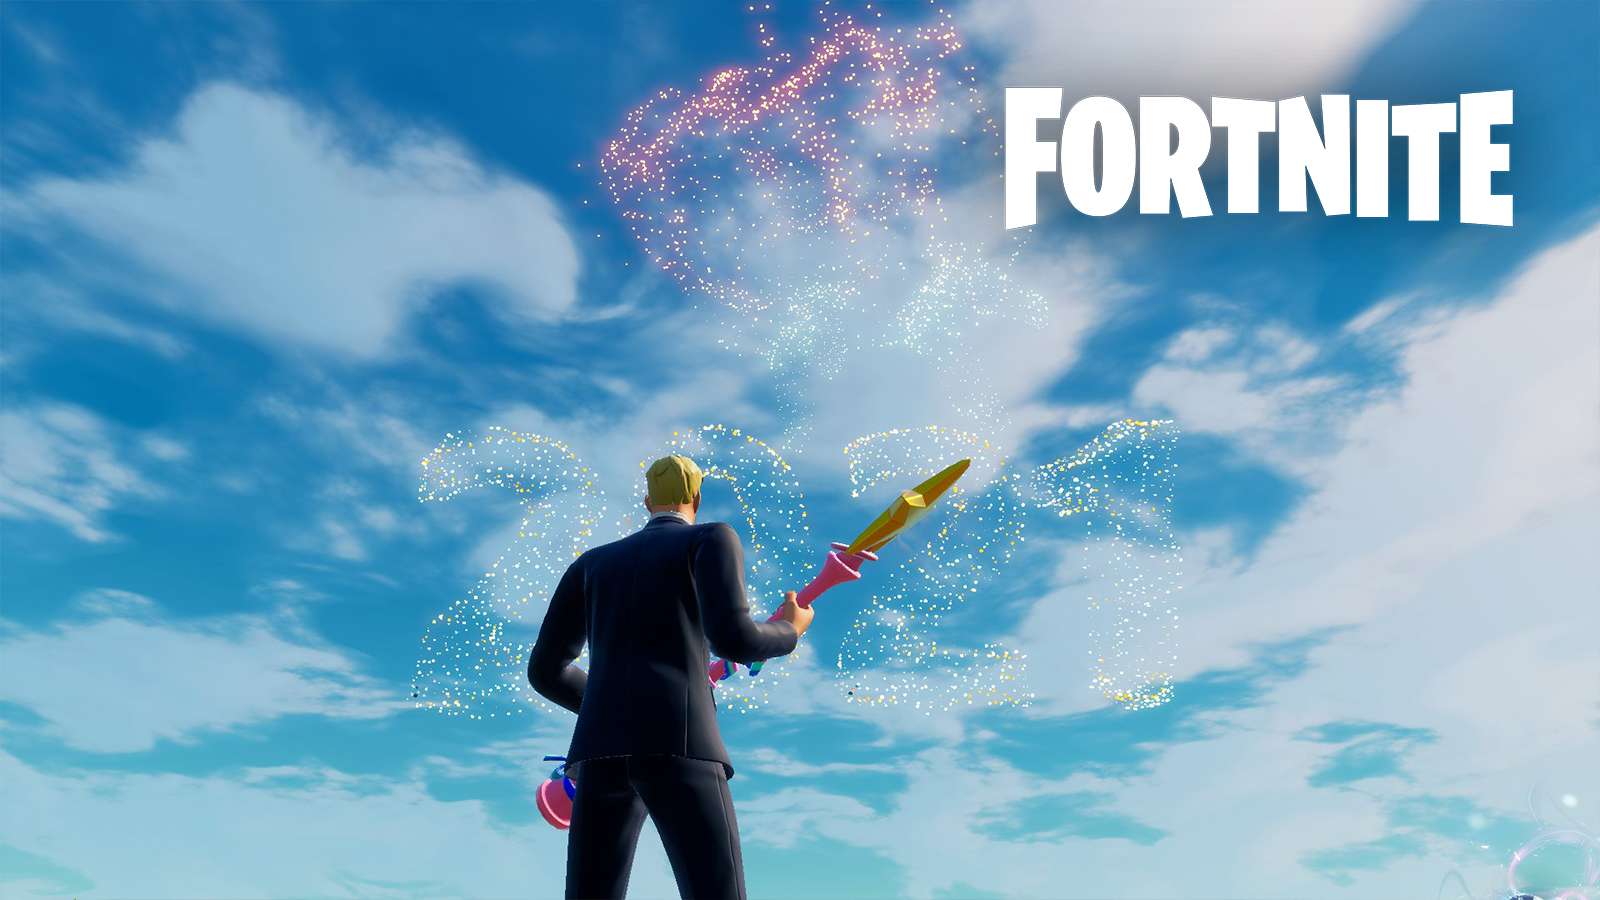 Fortnite's 2021 celebration with fireworks shooting off in the sky